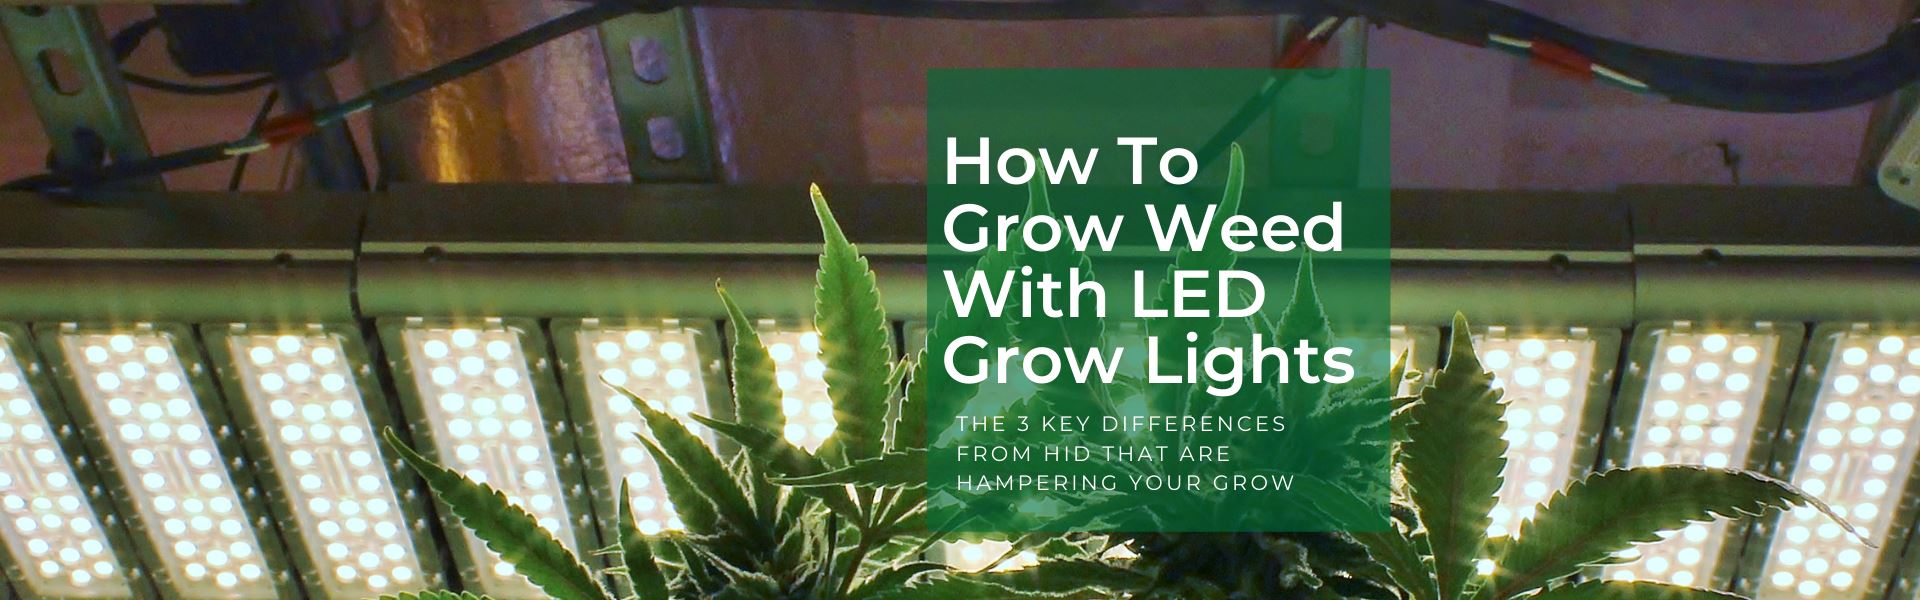 New Lights, Setting up a small Hydroponic System for this next grow - Grow  from Home - Growers Network Forum